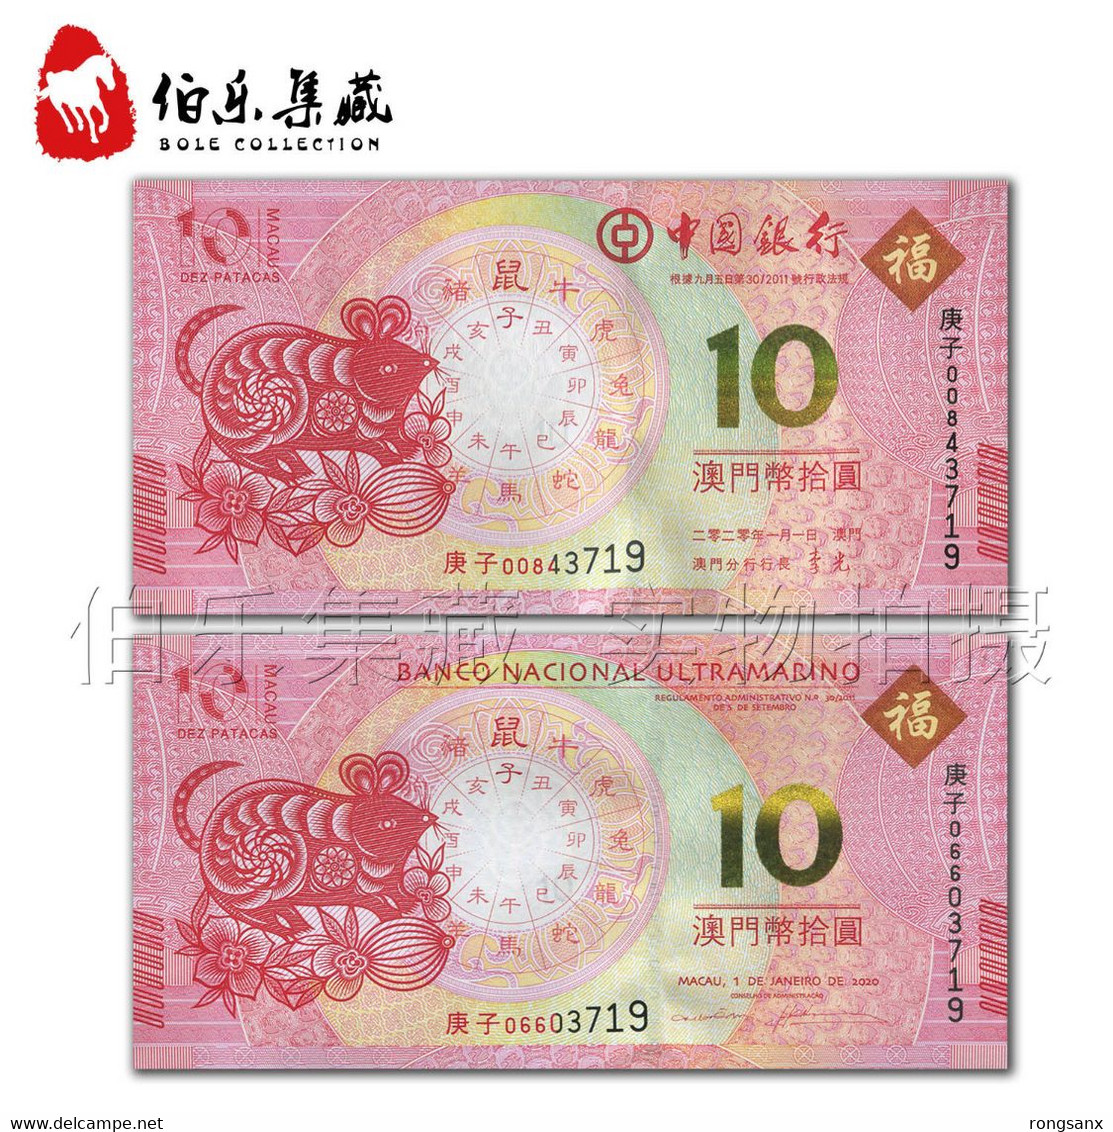 2020 MACAO BANKNOTE YEAR OF THE RAT 2V - Macao